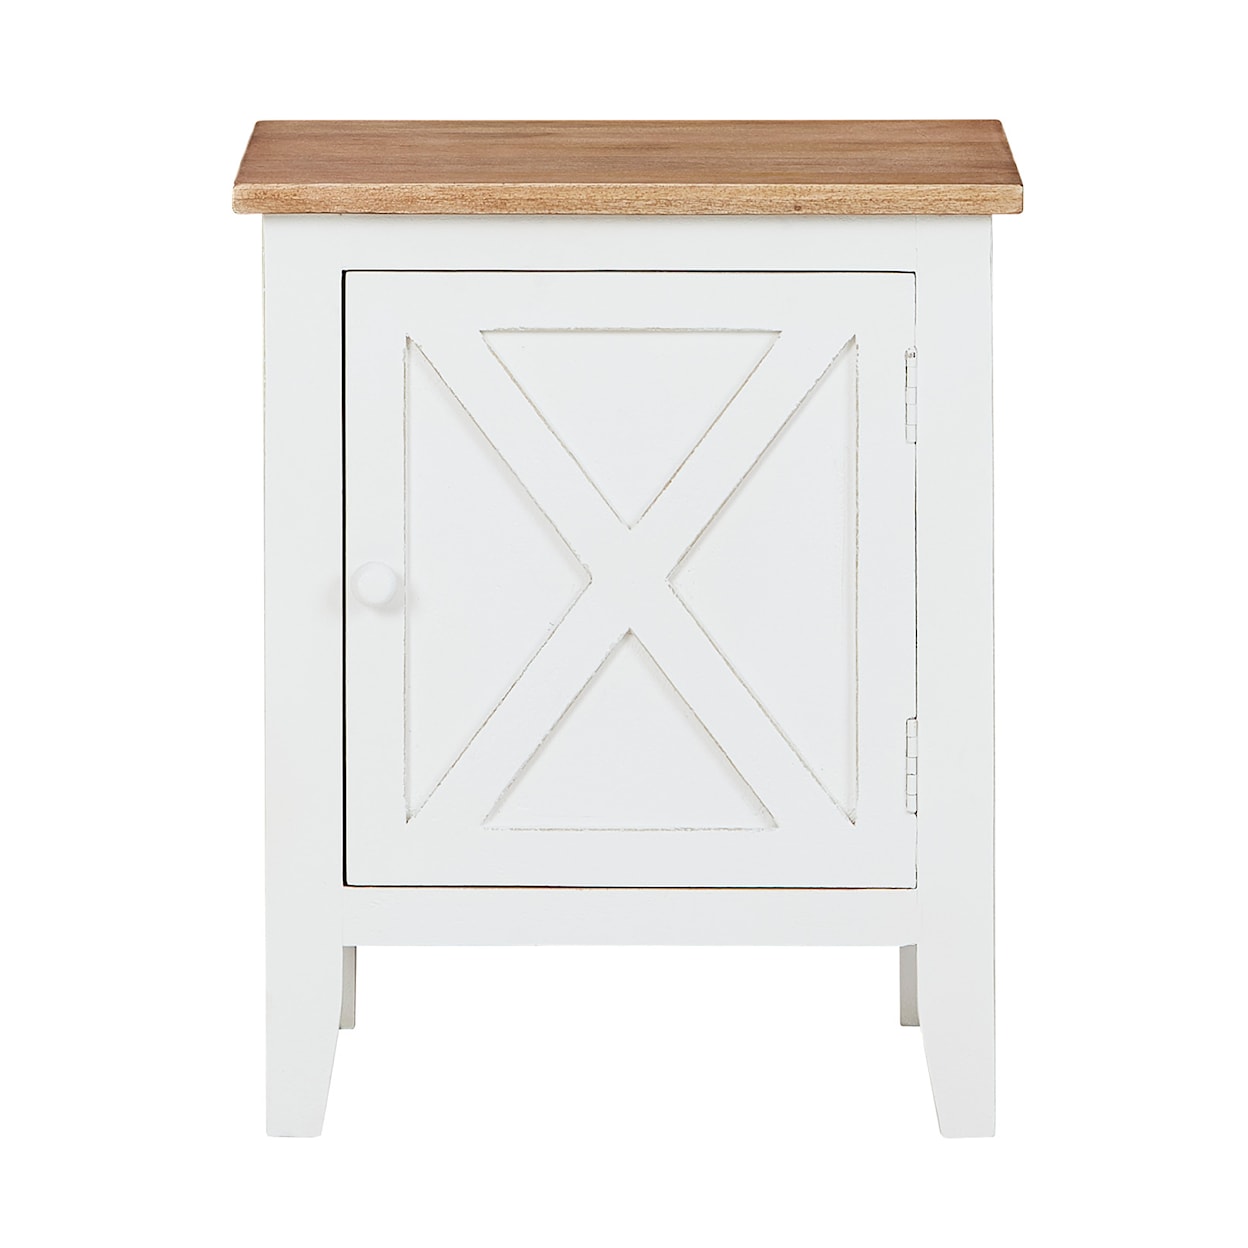 Signature Design by Ashley Gylesburg Accent Cabinet